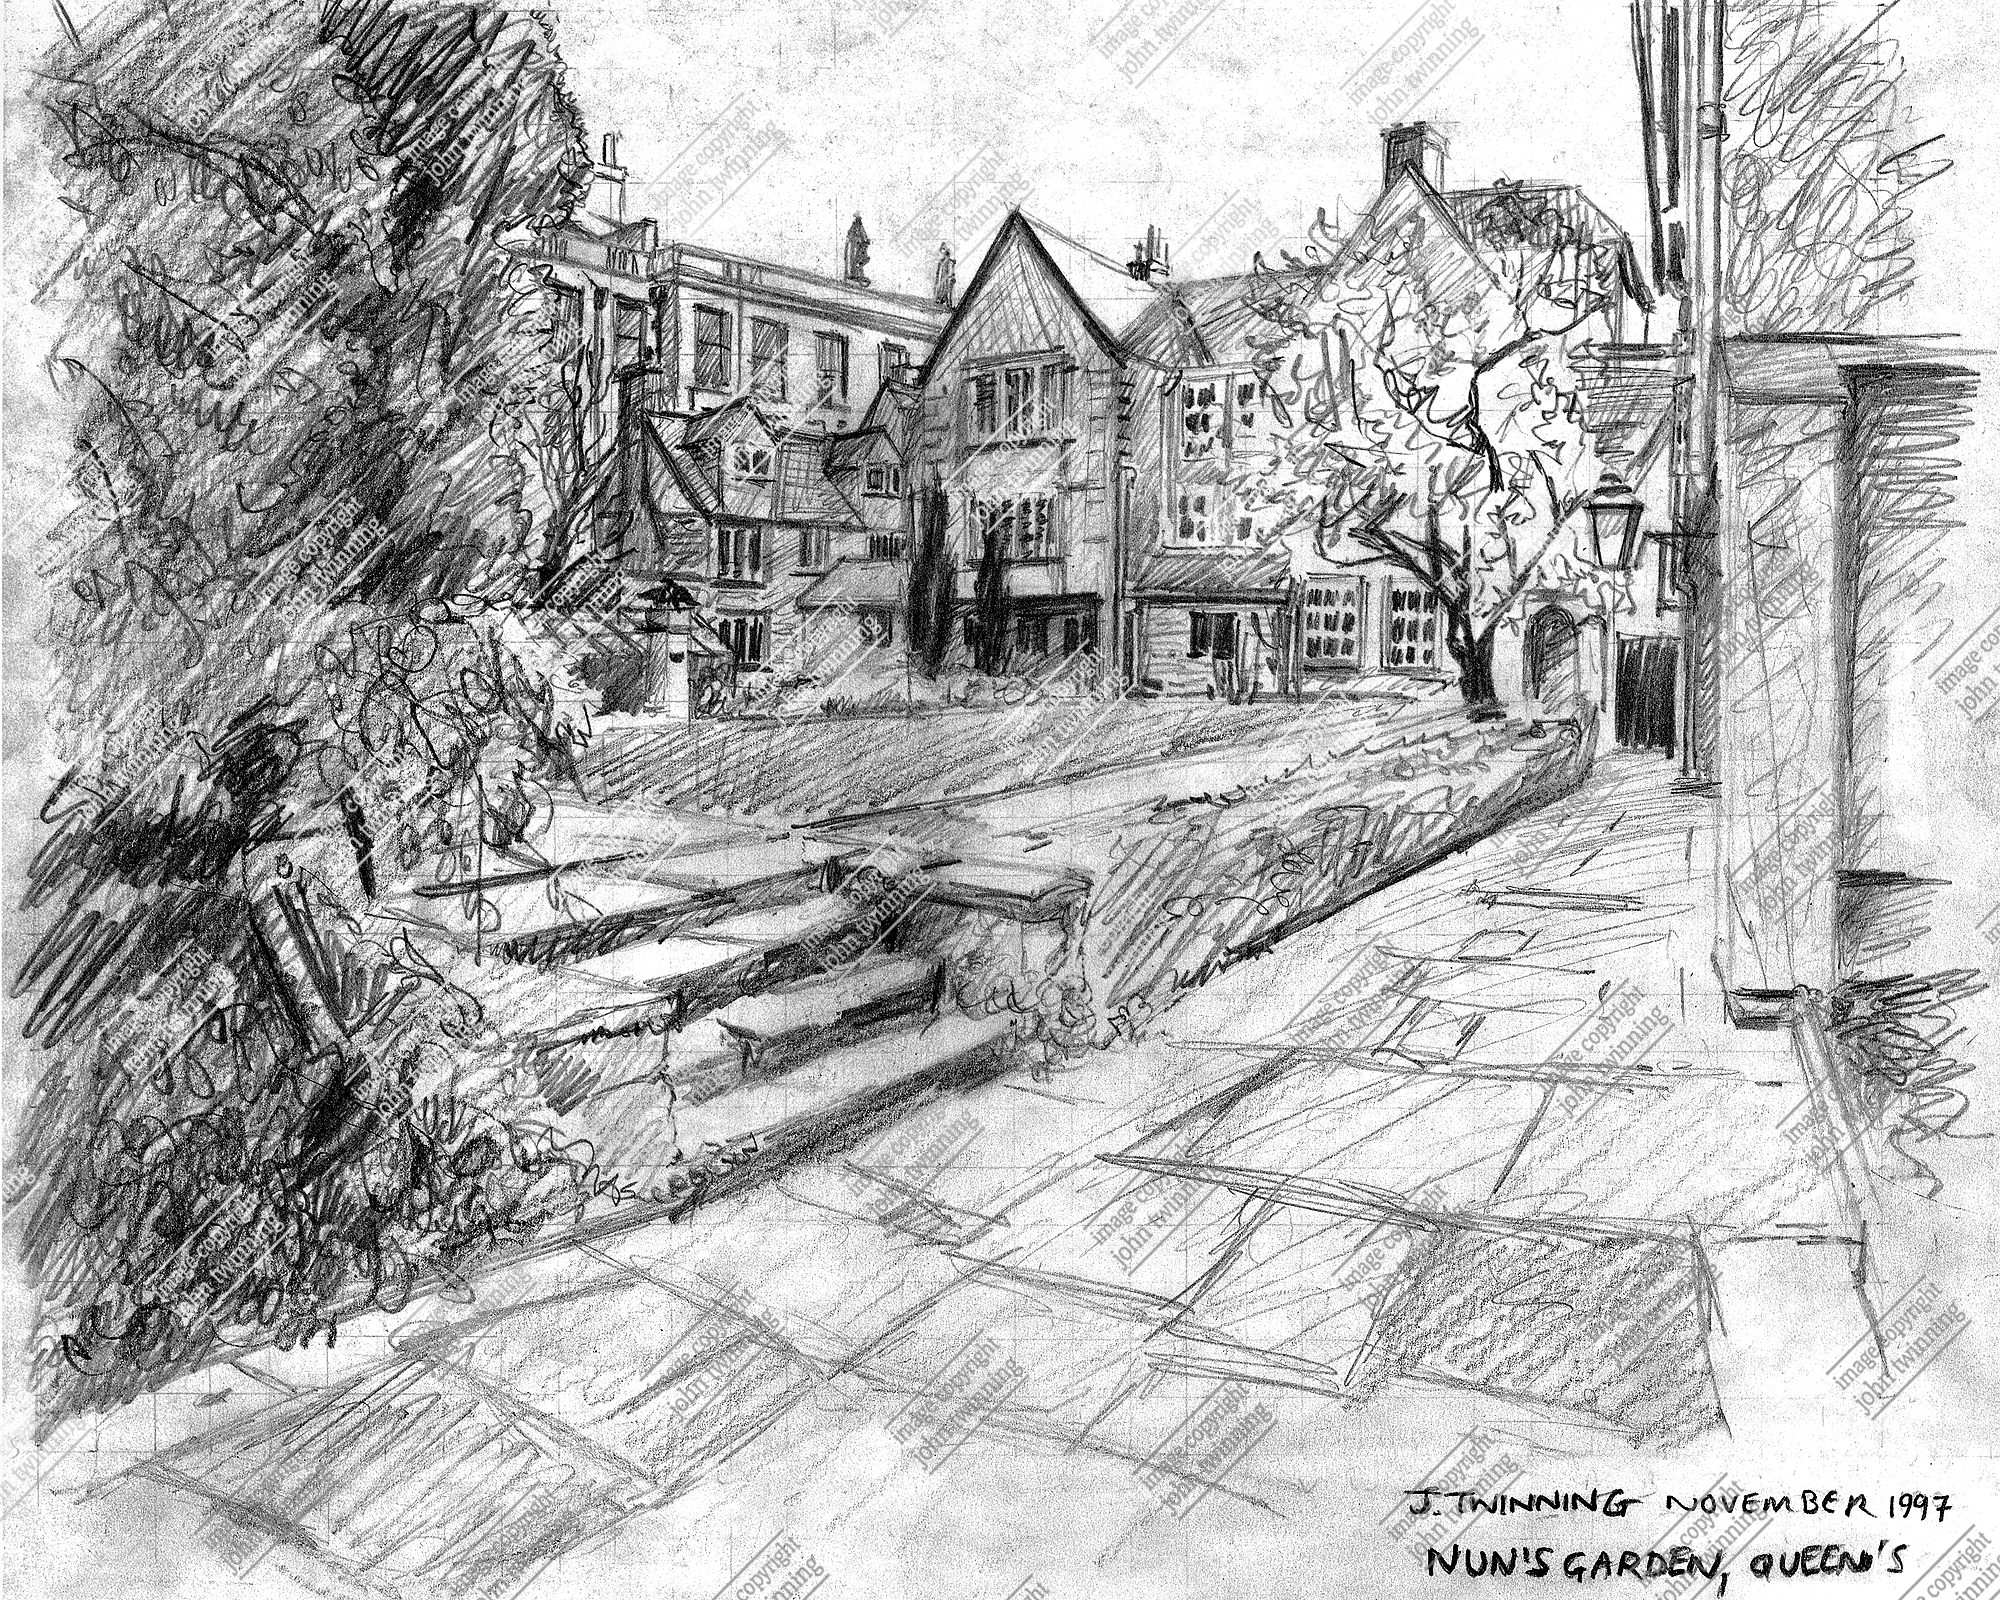 'The Nun's Garden' [landscape] - art print from a pencil drawing of this view of the queen's college, oxford